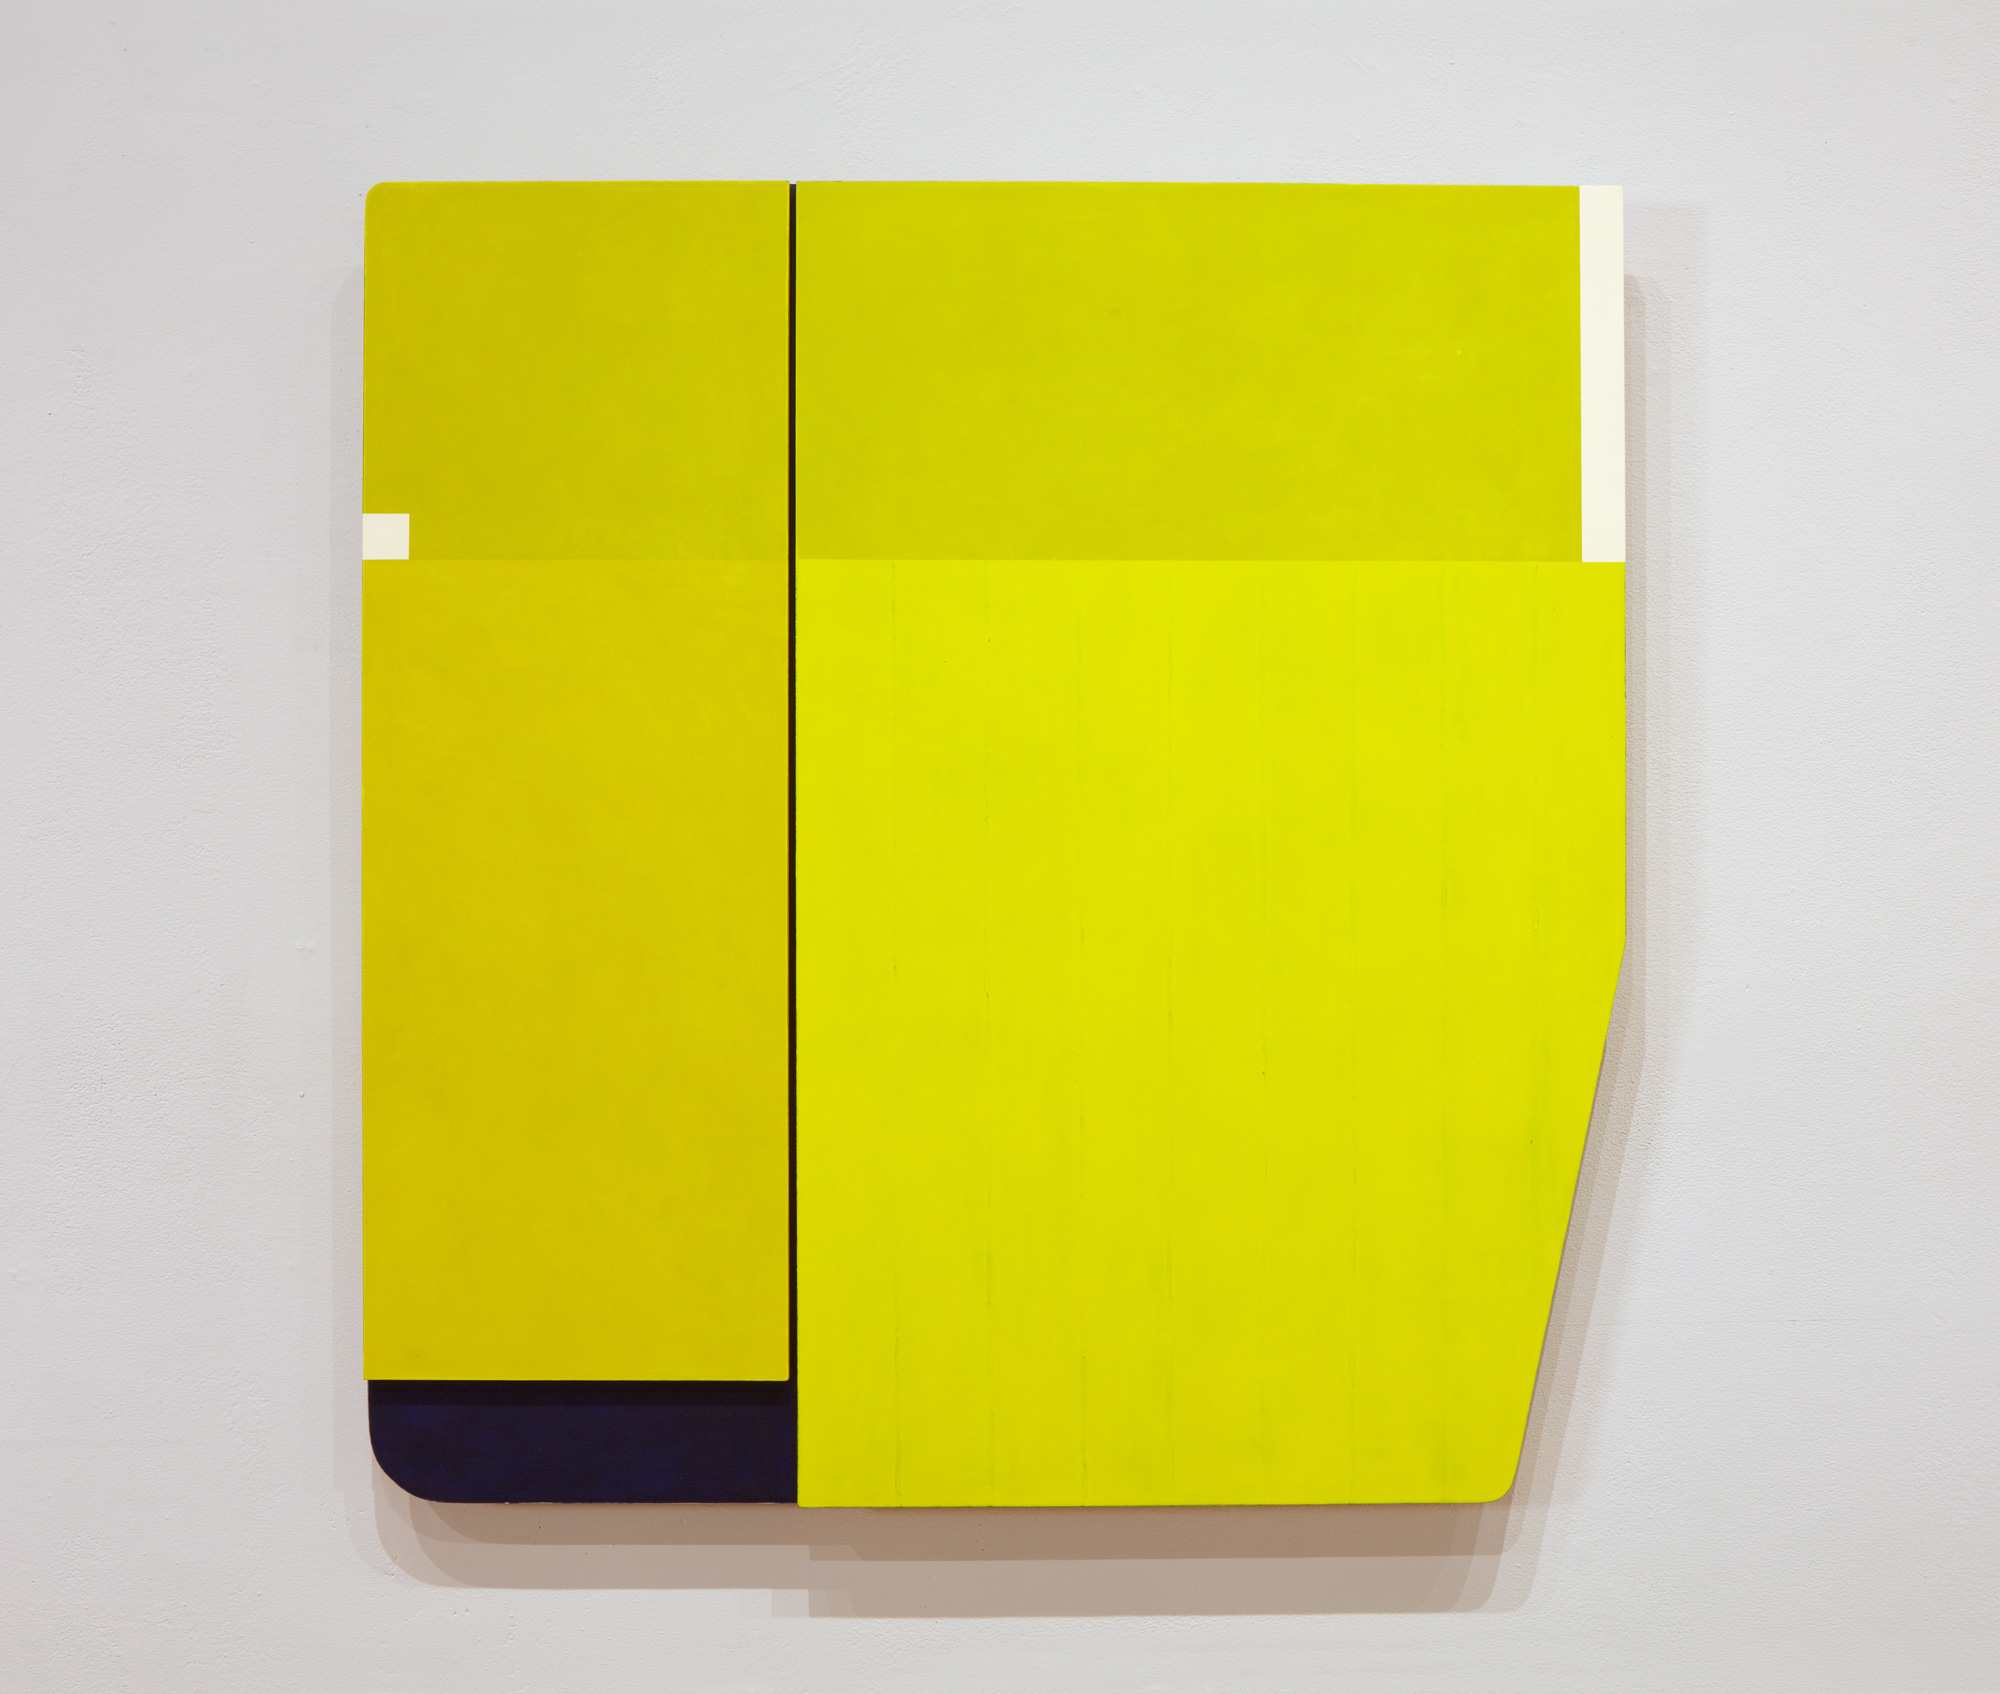 Babette Herschberger. Clipped Yellow, 2021. acrylic on plywood. 47 x 45 x 2-1/4 in. Courtesy of the artist. Installation view of Skyway 20/21 exhibition at USF Contemporary Art Museum. Photo: Will Lytch.